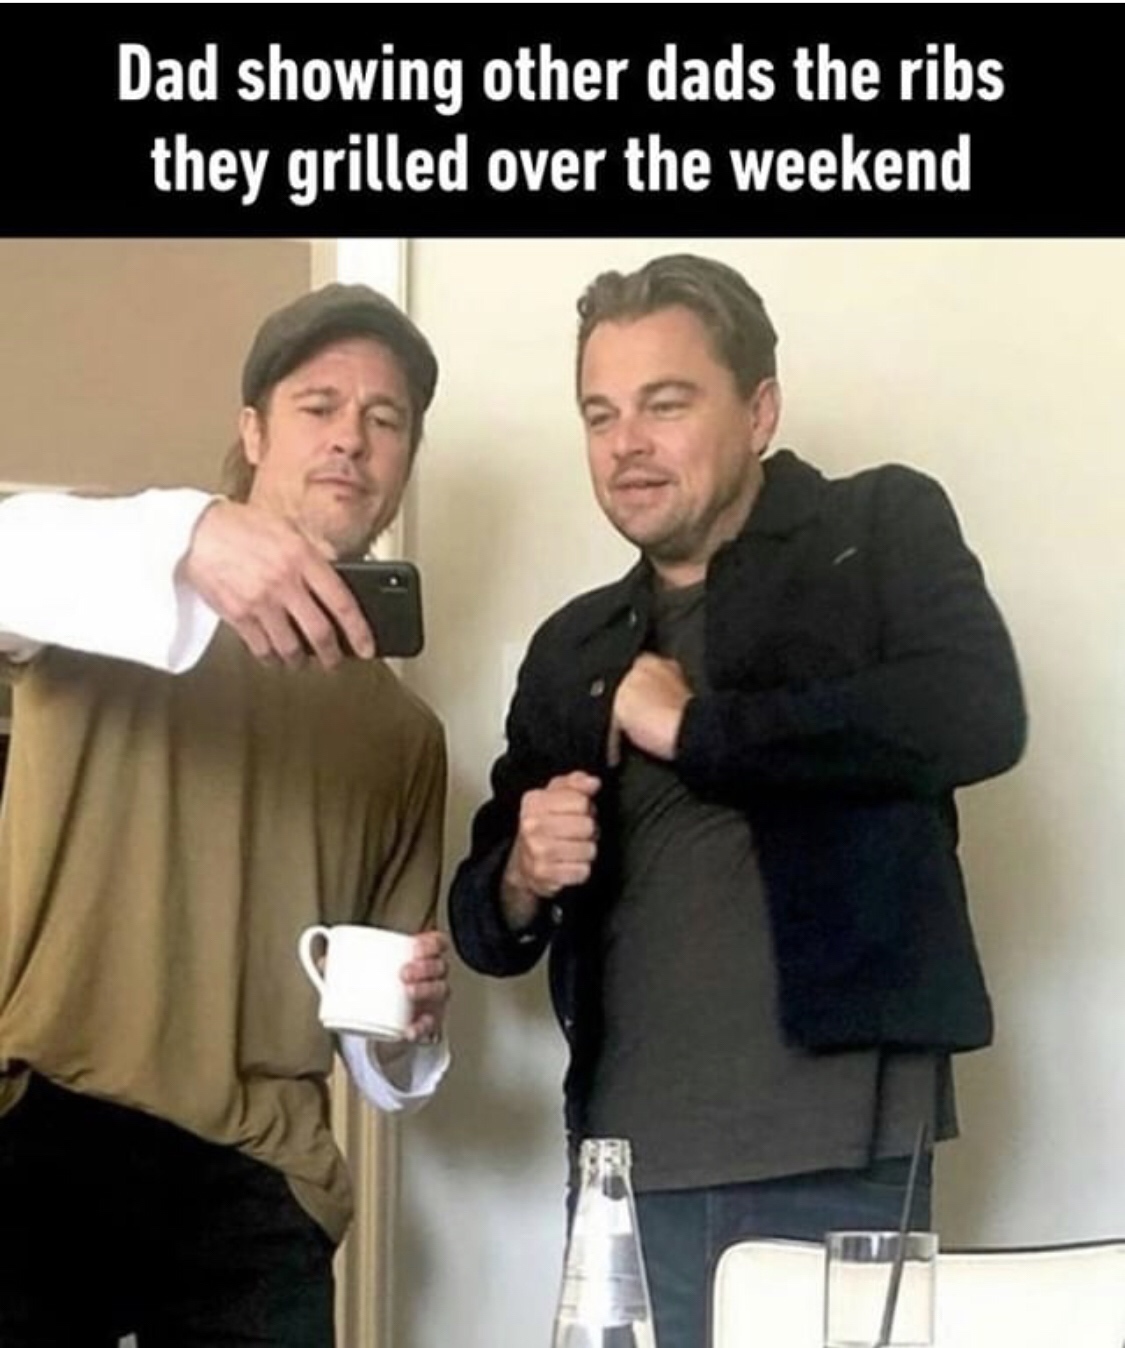 brad pitt and leonardo dicaprio selfie - Dad showing other dads the ribs they grilled over the weekend